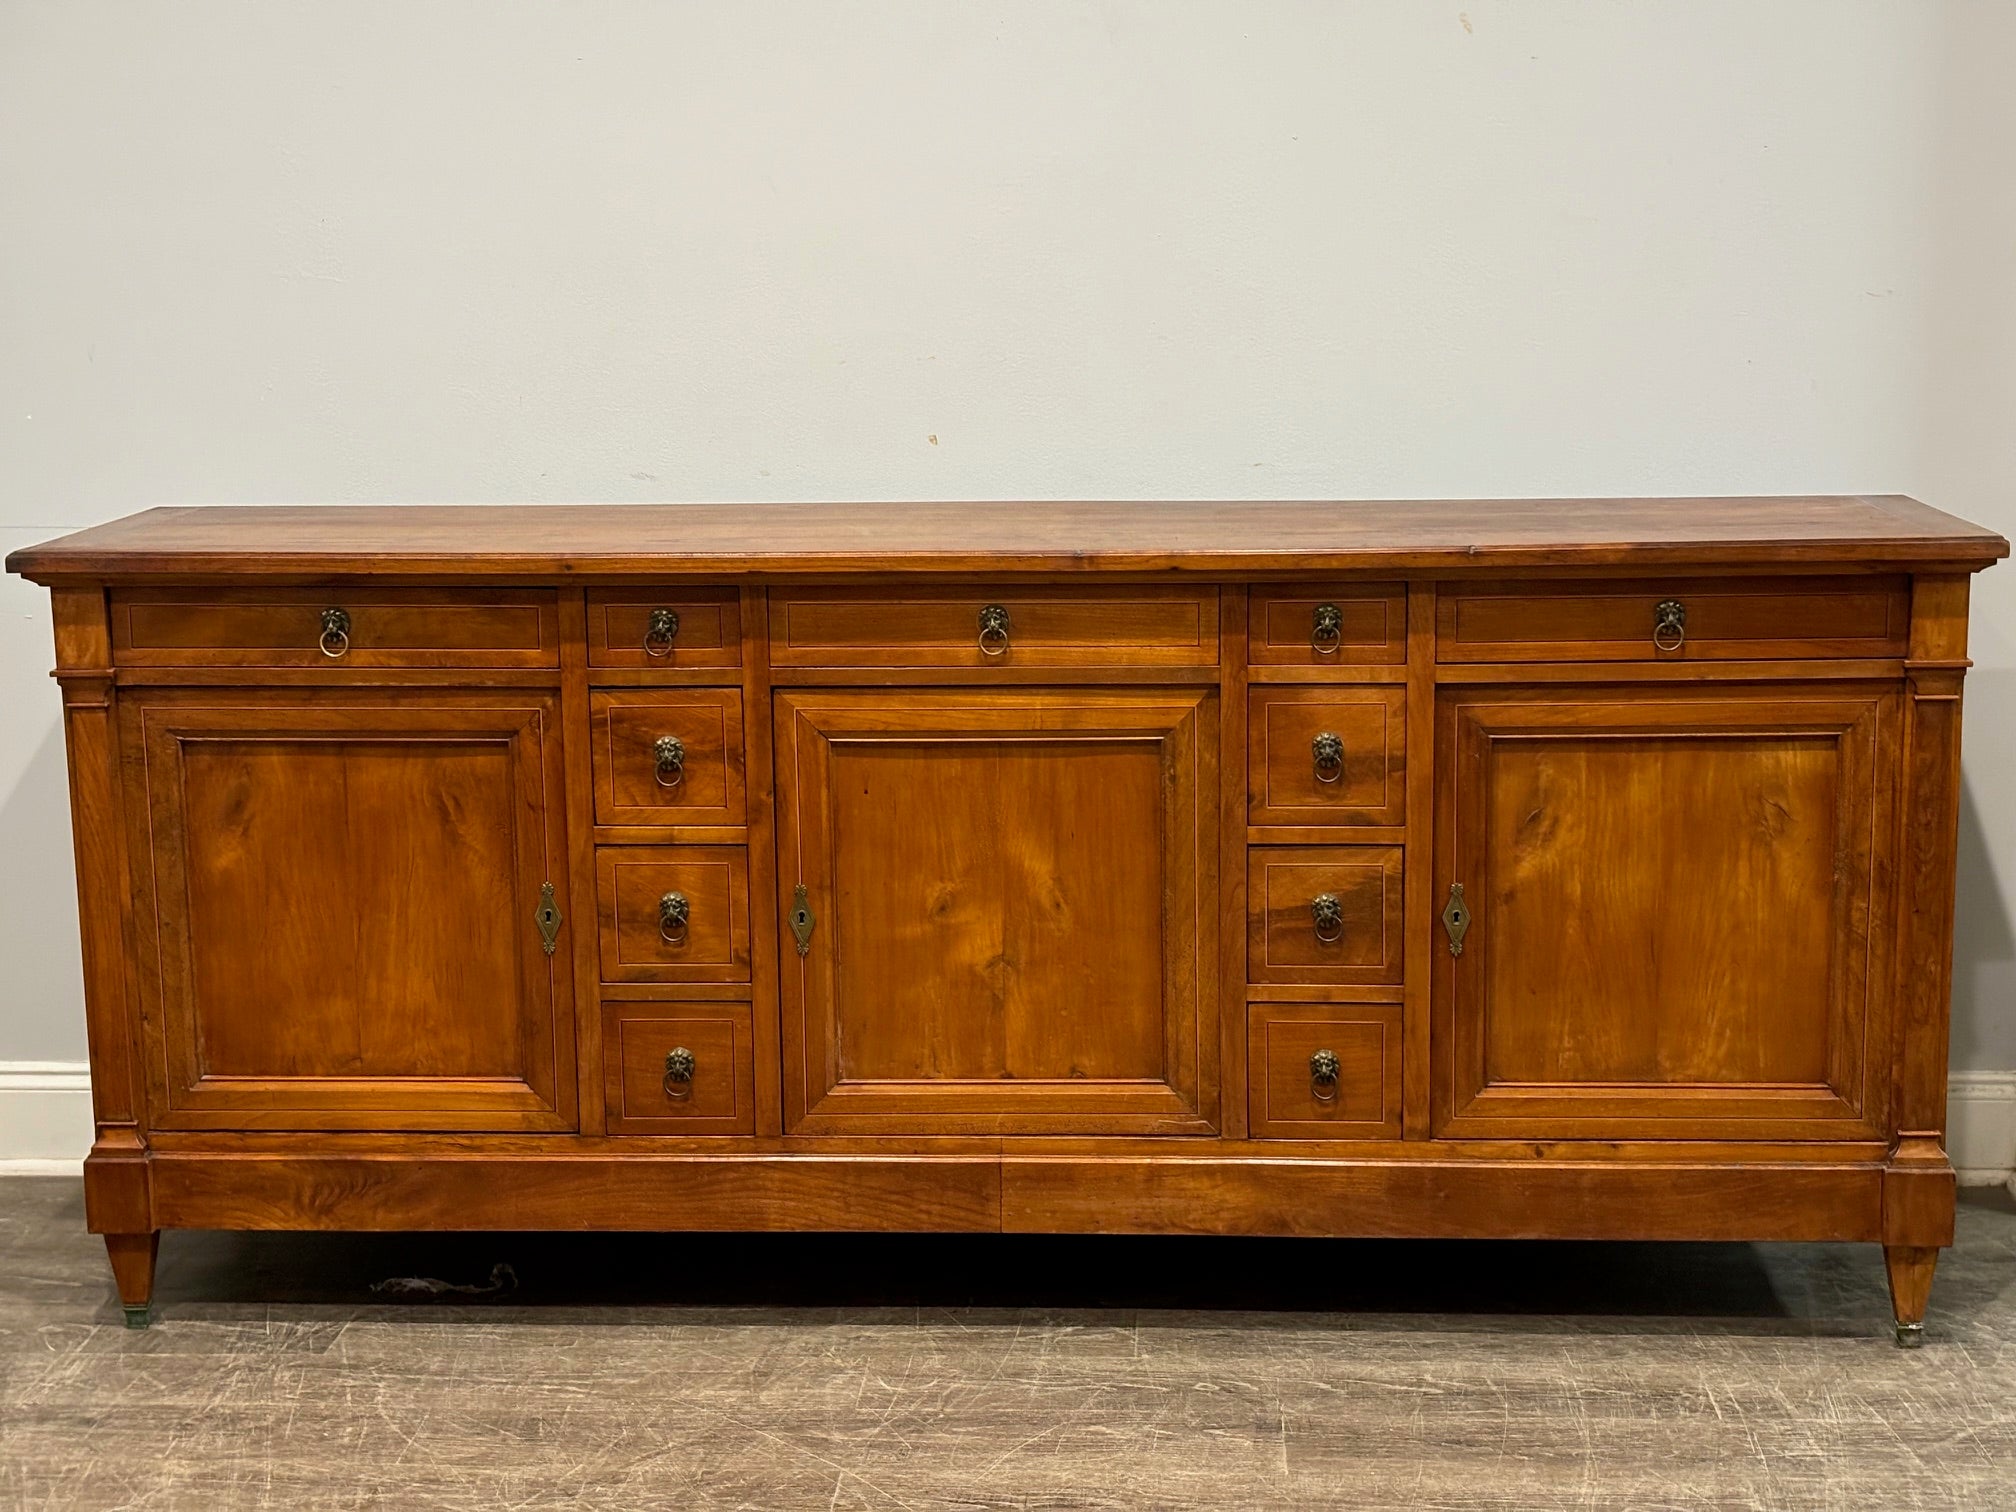 This is a beautiful sideboard in walnut with inlay on the top, doors and drawers, very refine.